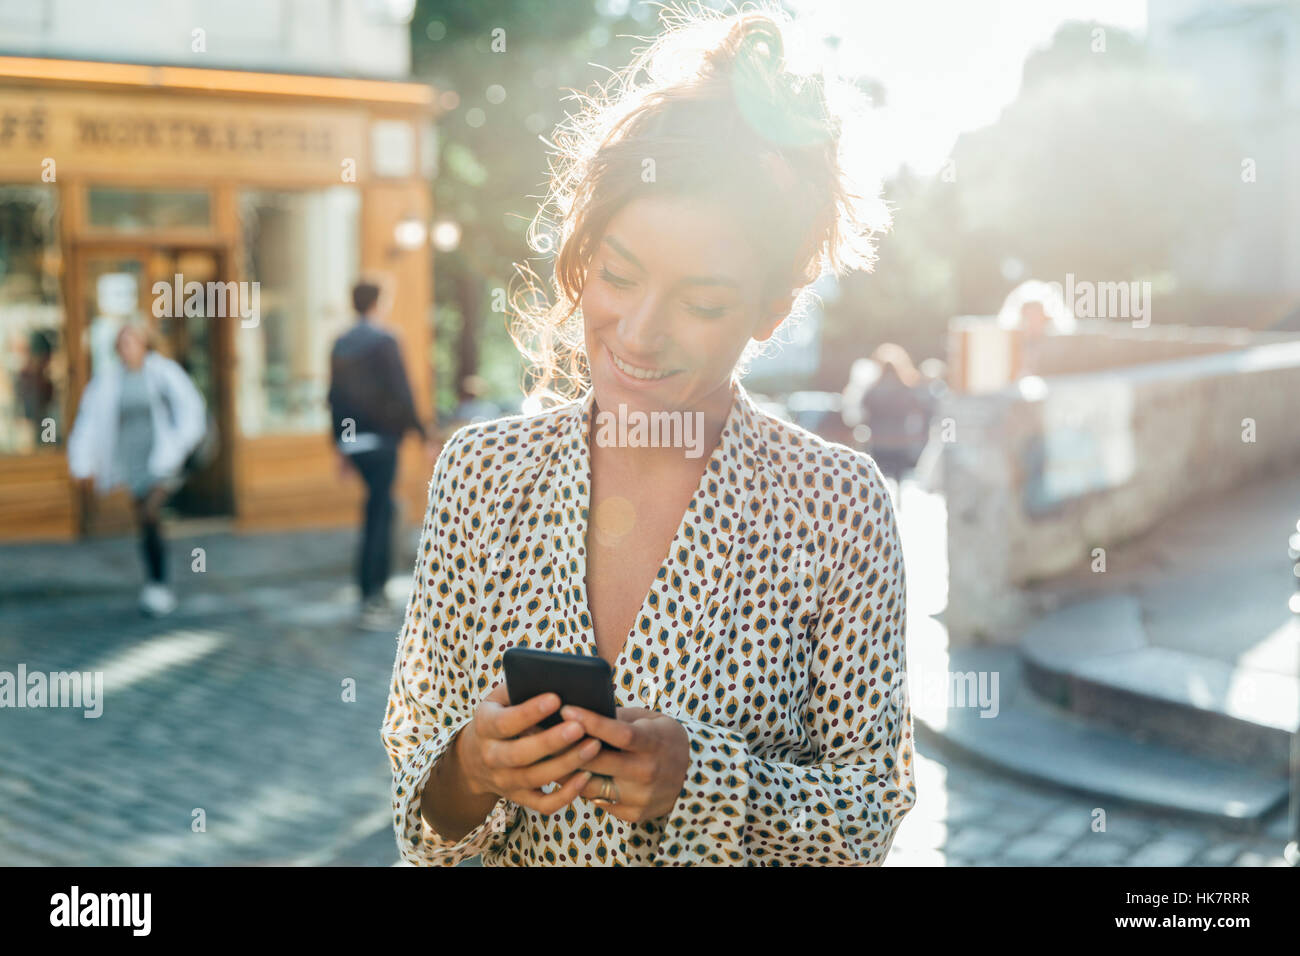 Paris, attractive woman visiting Montmartre district and using a smart phone Stock Photo